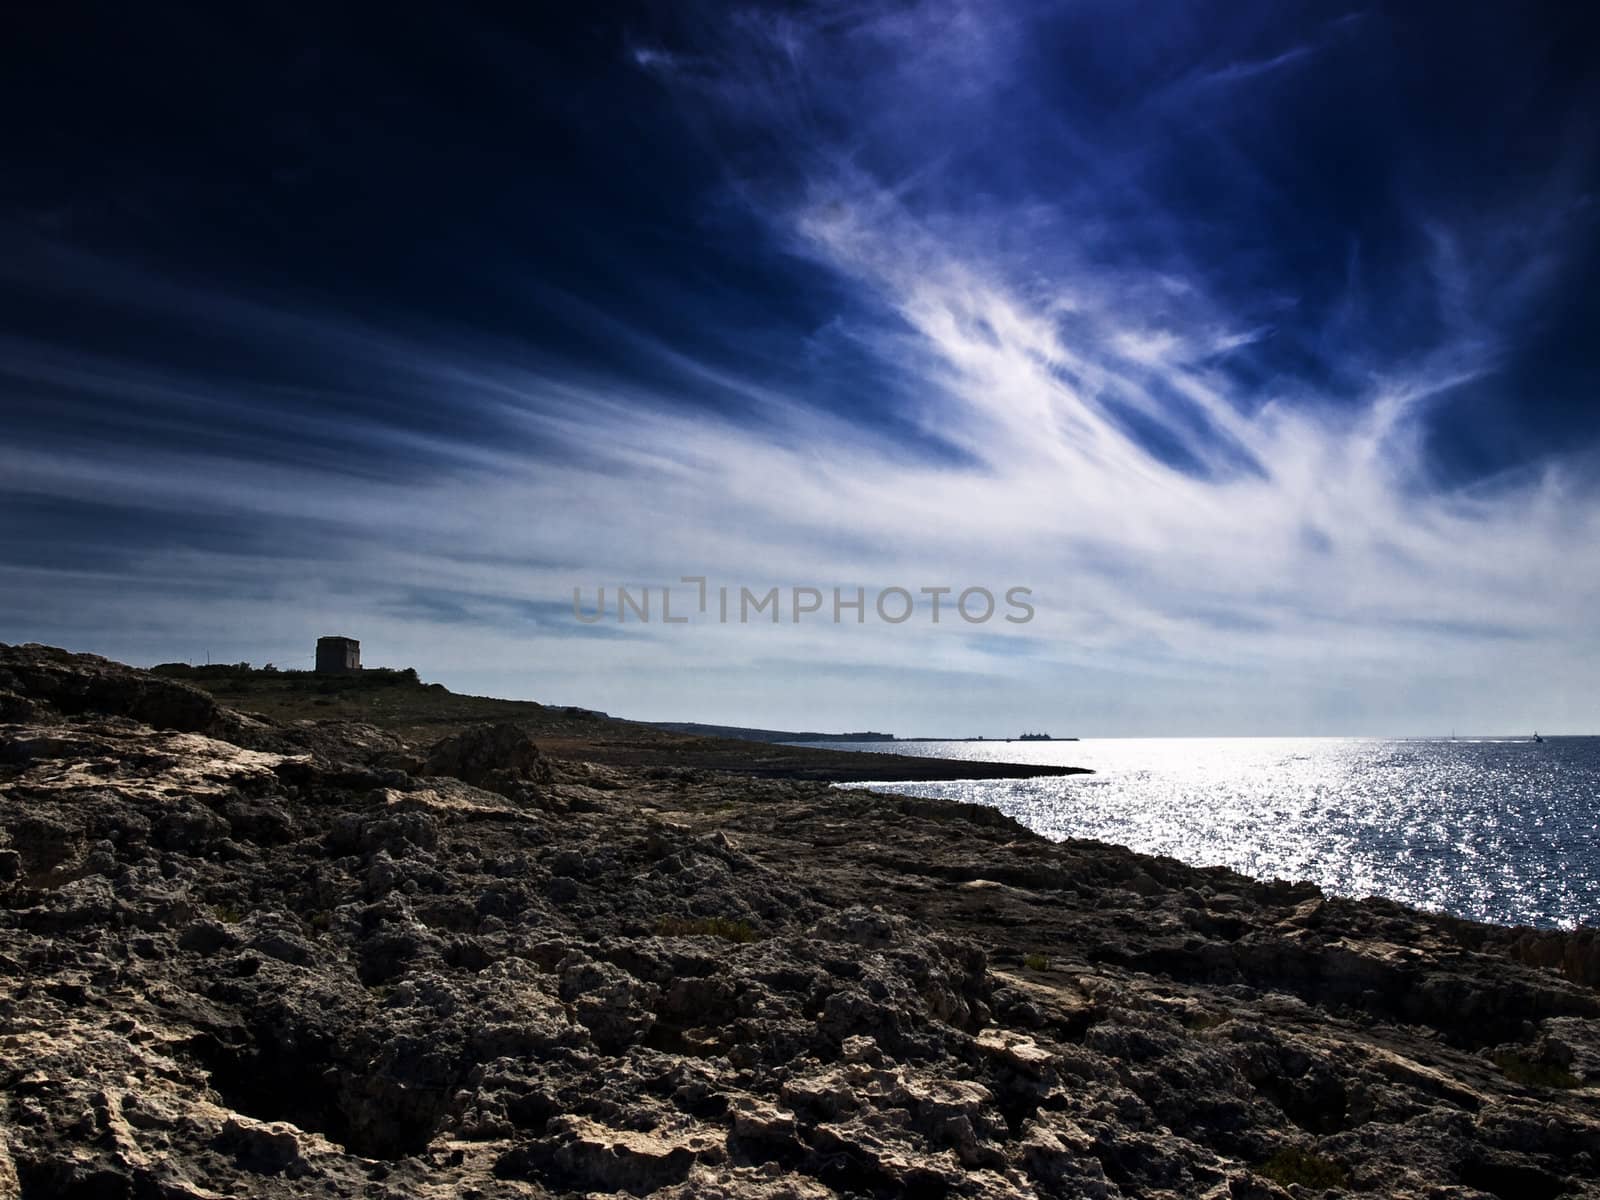 Typical summer landscape and scenery from the coast in Malta.